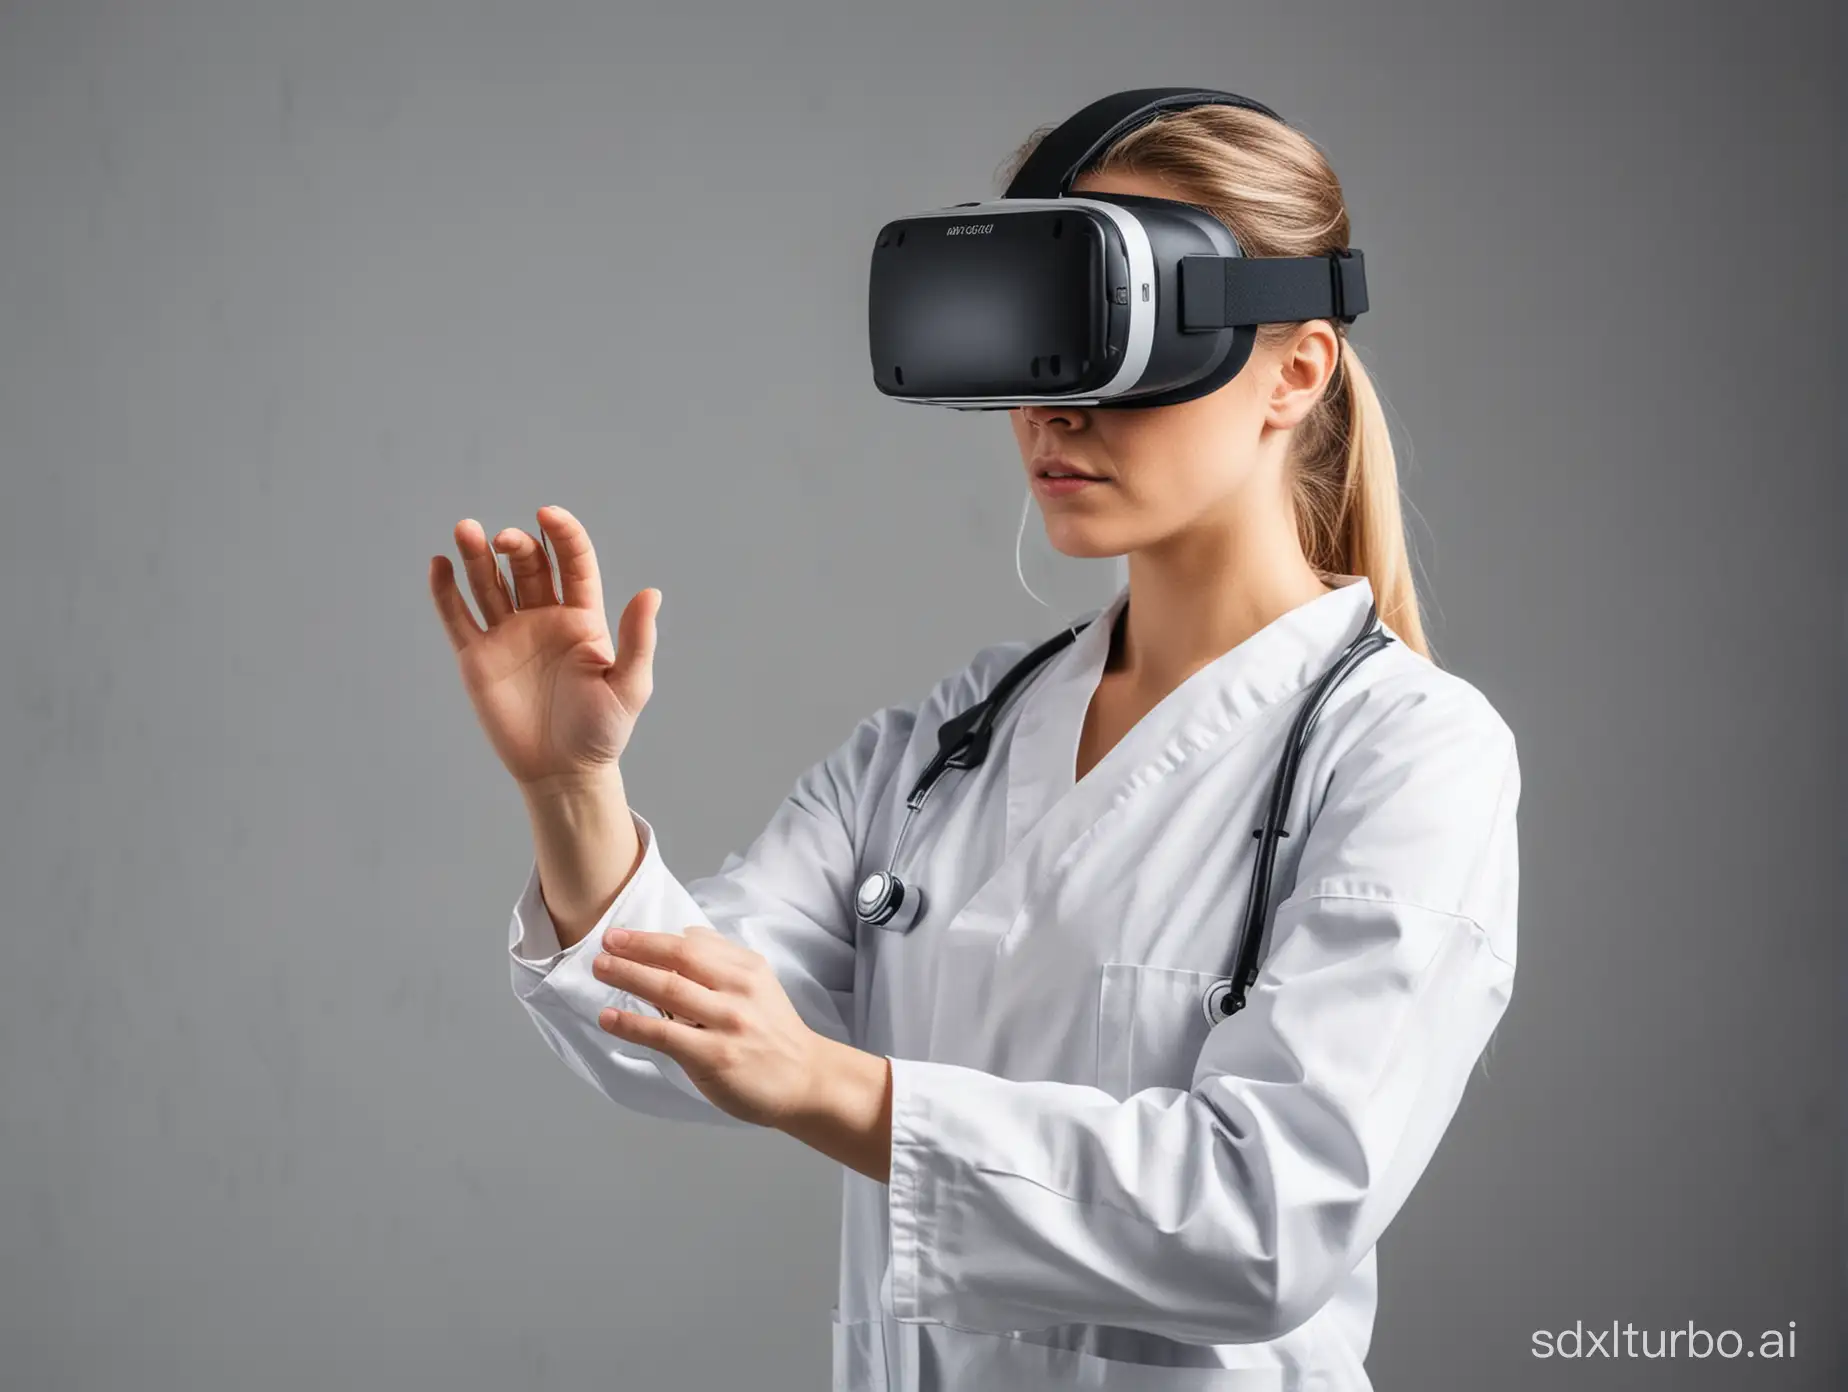 The future innovation of VR technology in medical education